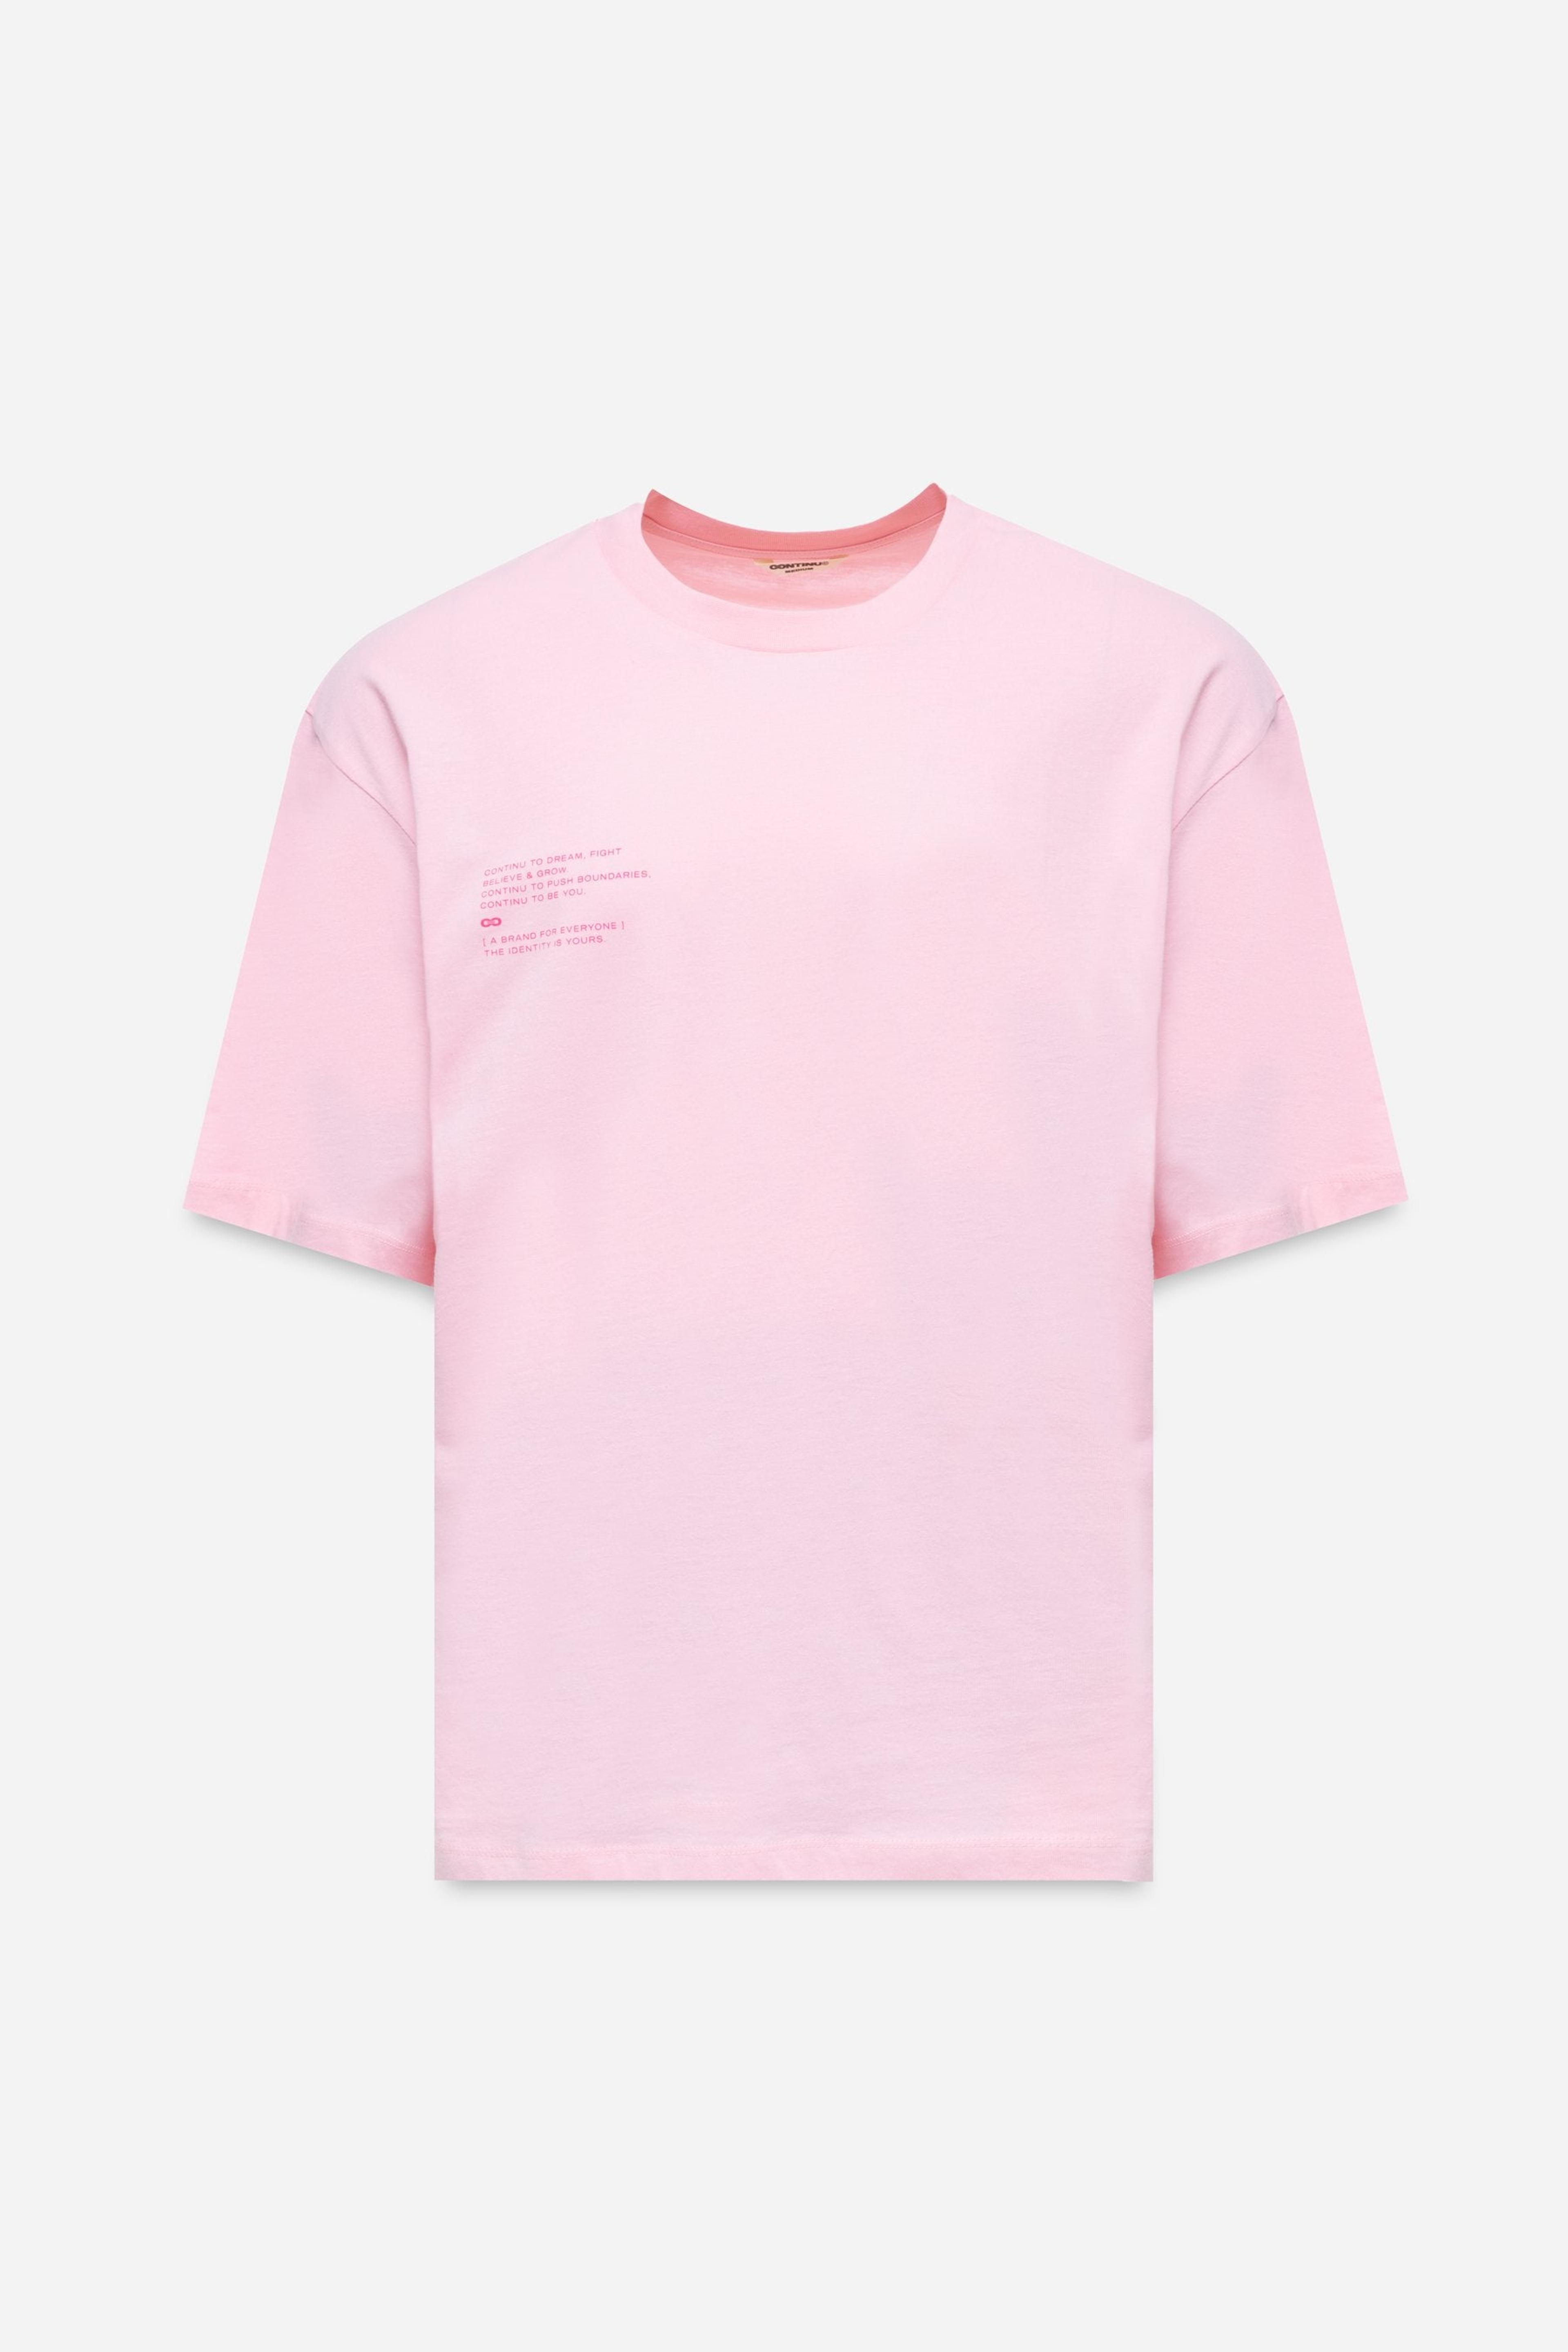 Alternate View 6 of CONTINU8 PINK OVERSIZED PRINT T-SHIRT